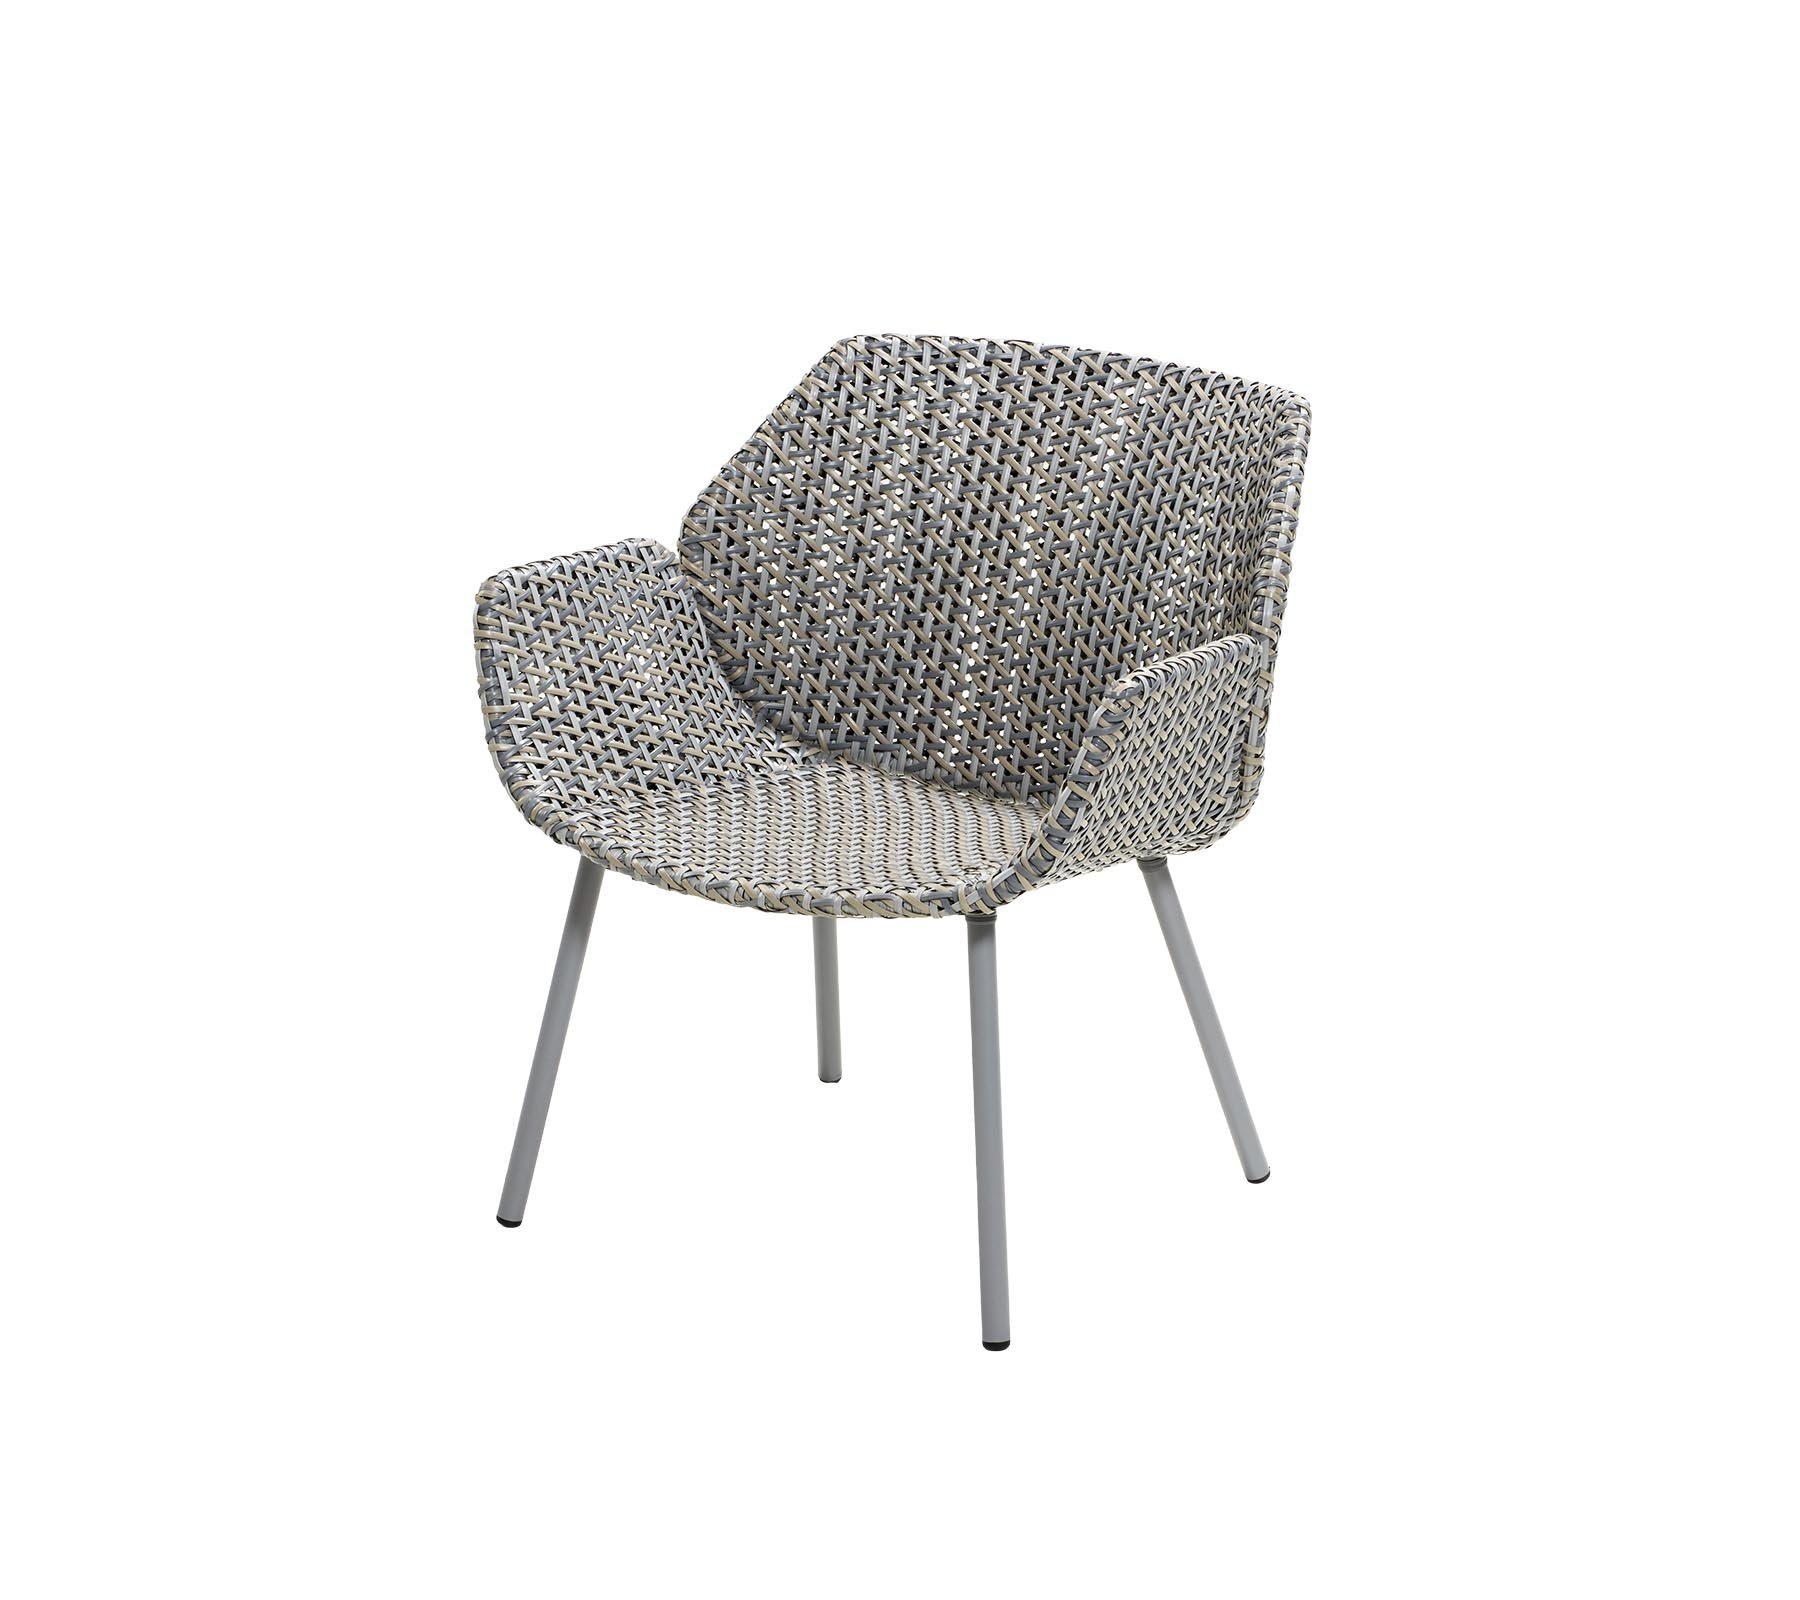 Vibe Chair lounge from Cane-line, designed by Welling/Ludvik